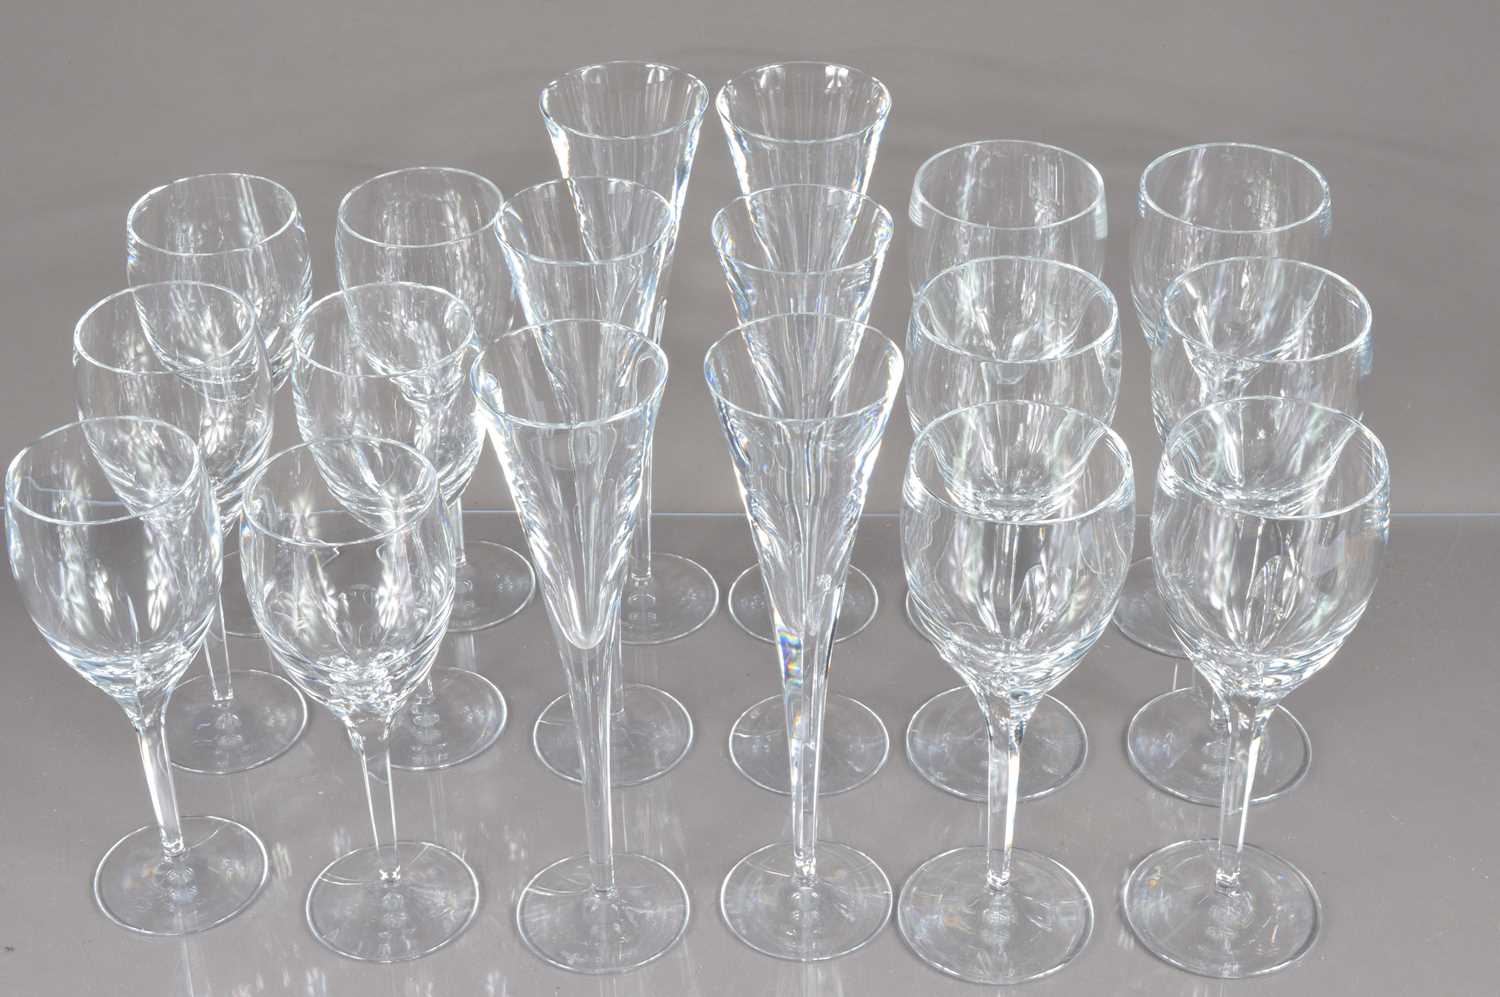 An elegant set of crystal glasses for six people by John Rocha for Waterford,